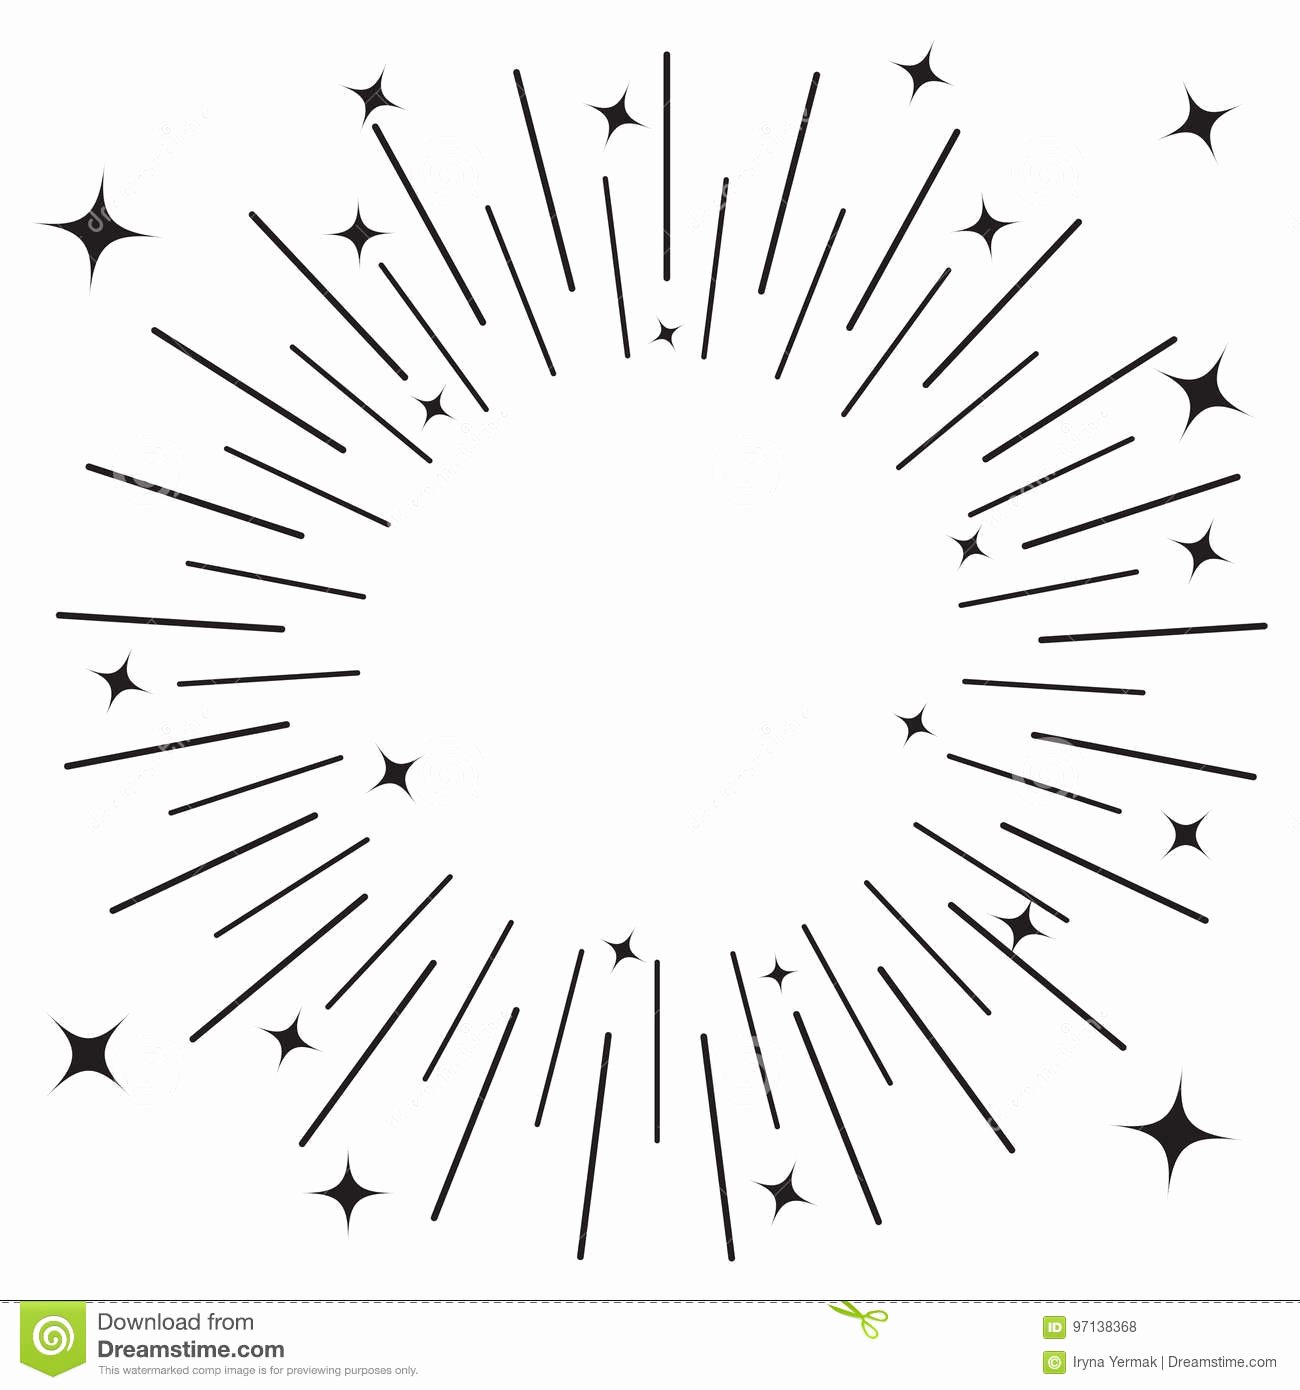 Star Template with Lines New Sunburst Round Black Line Circle Shining Effect with